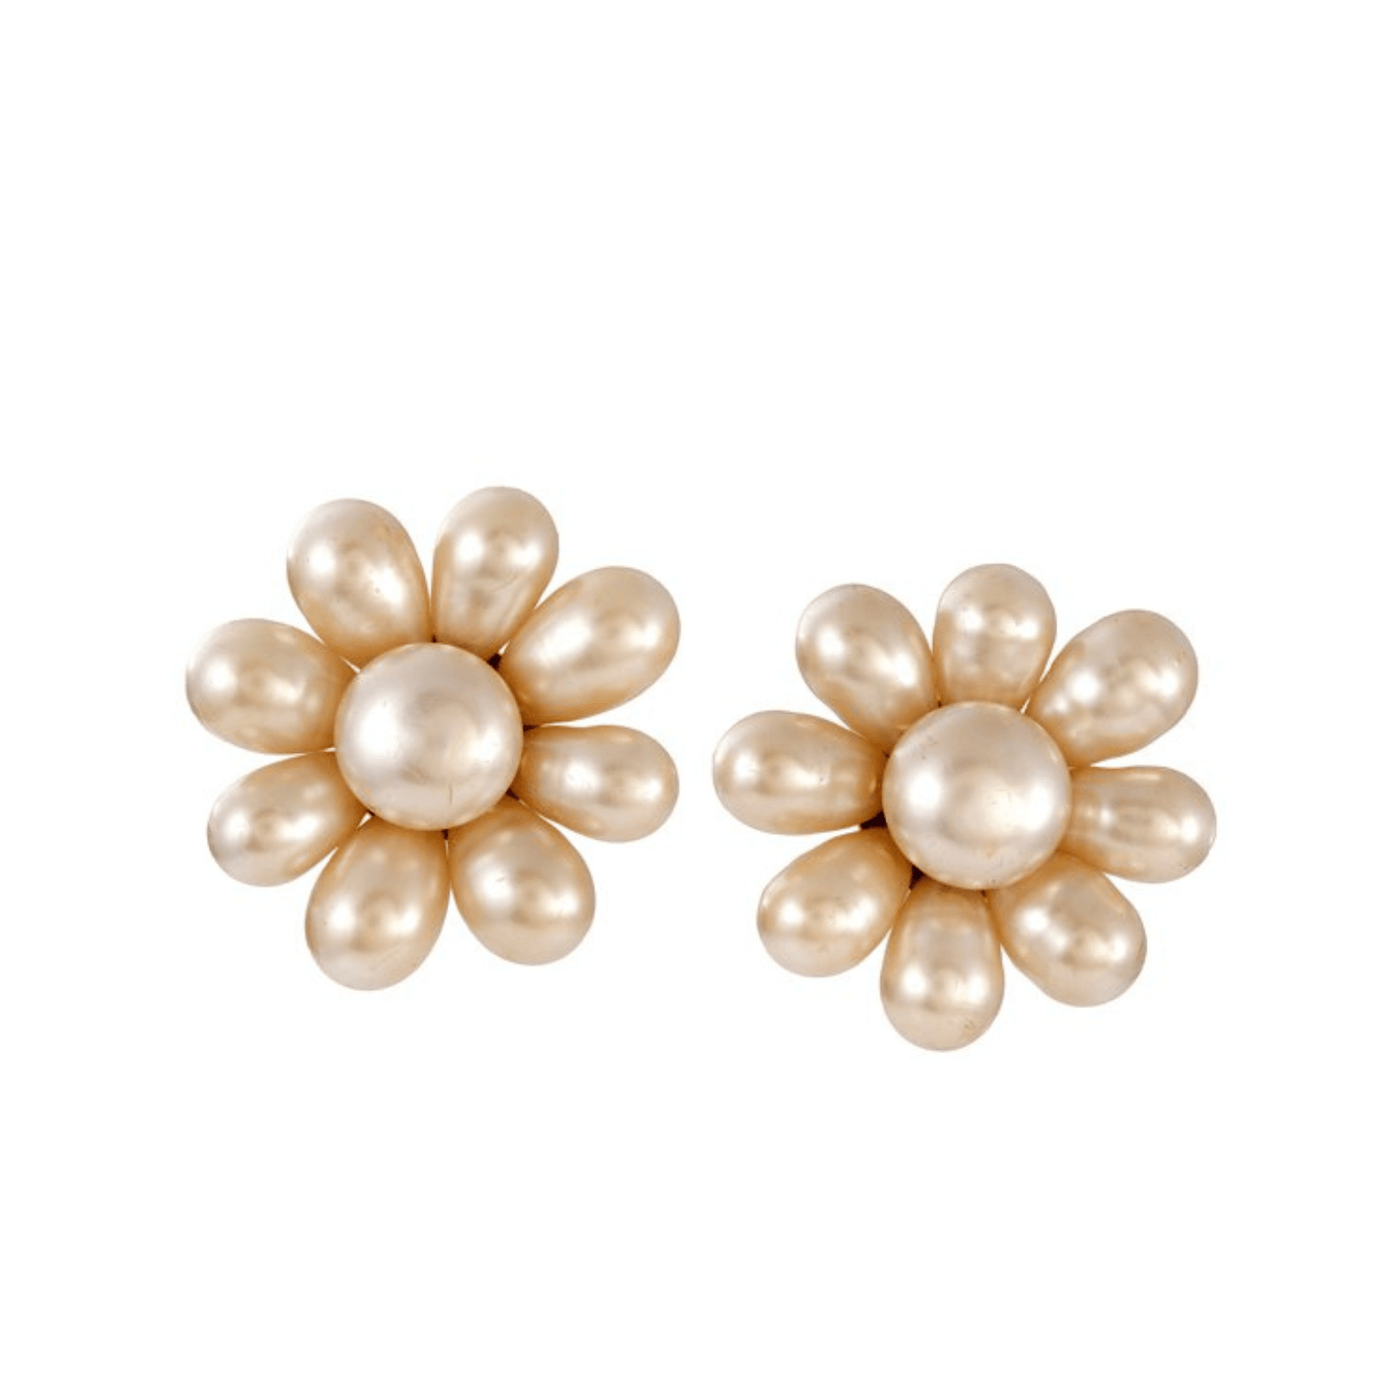 Chanel Pearl Flower Earrings - Only Authentics